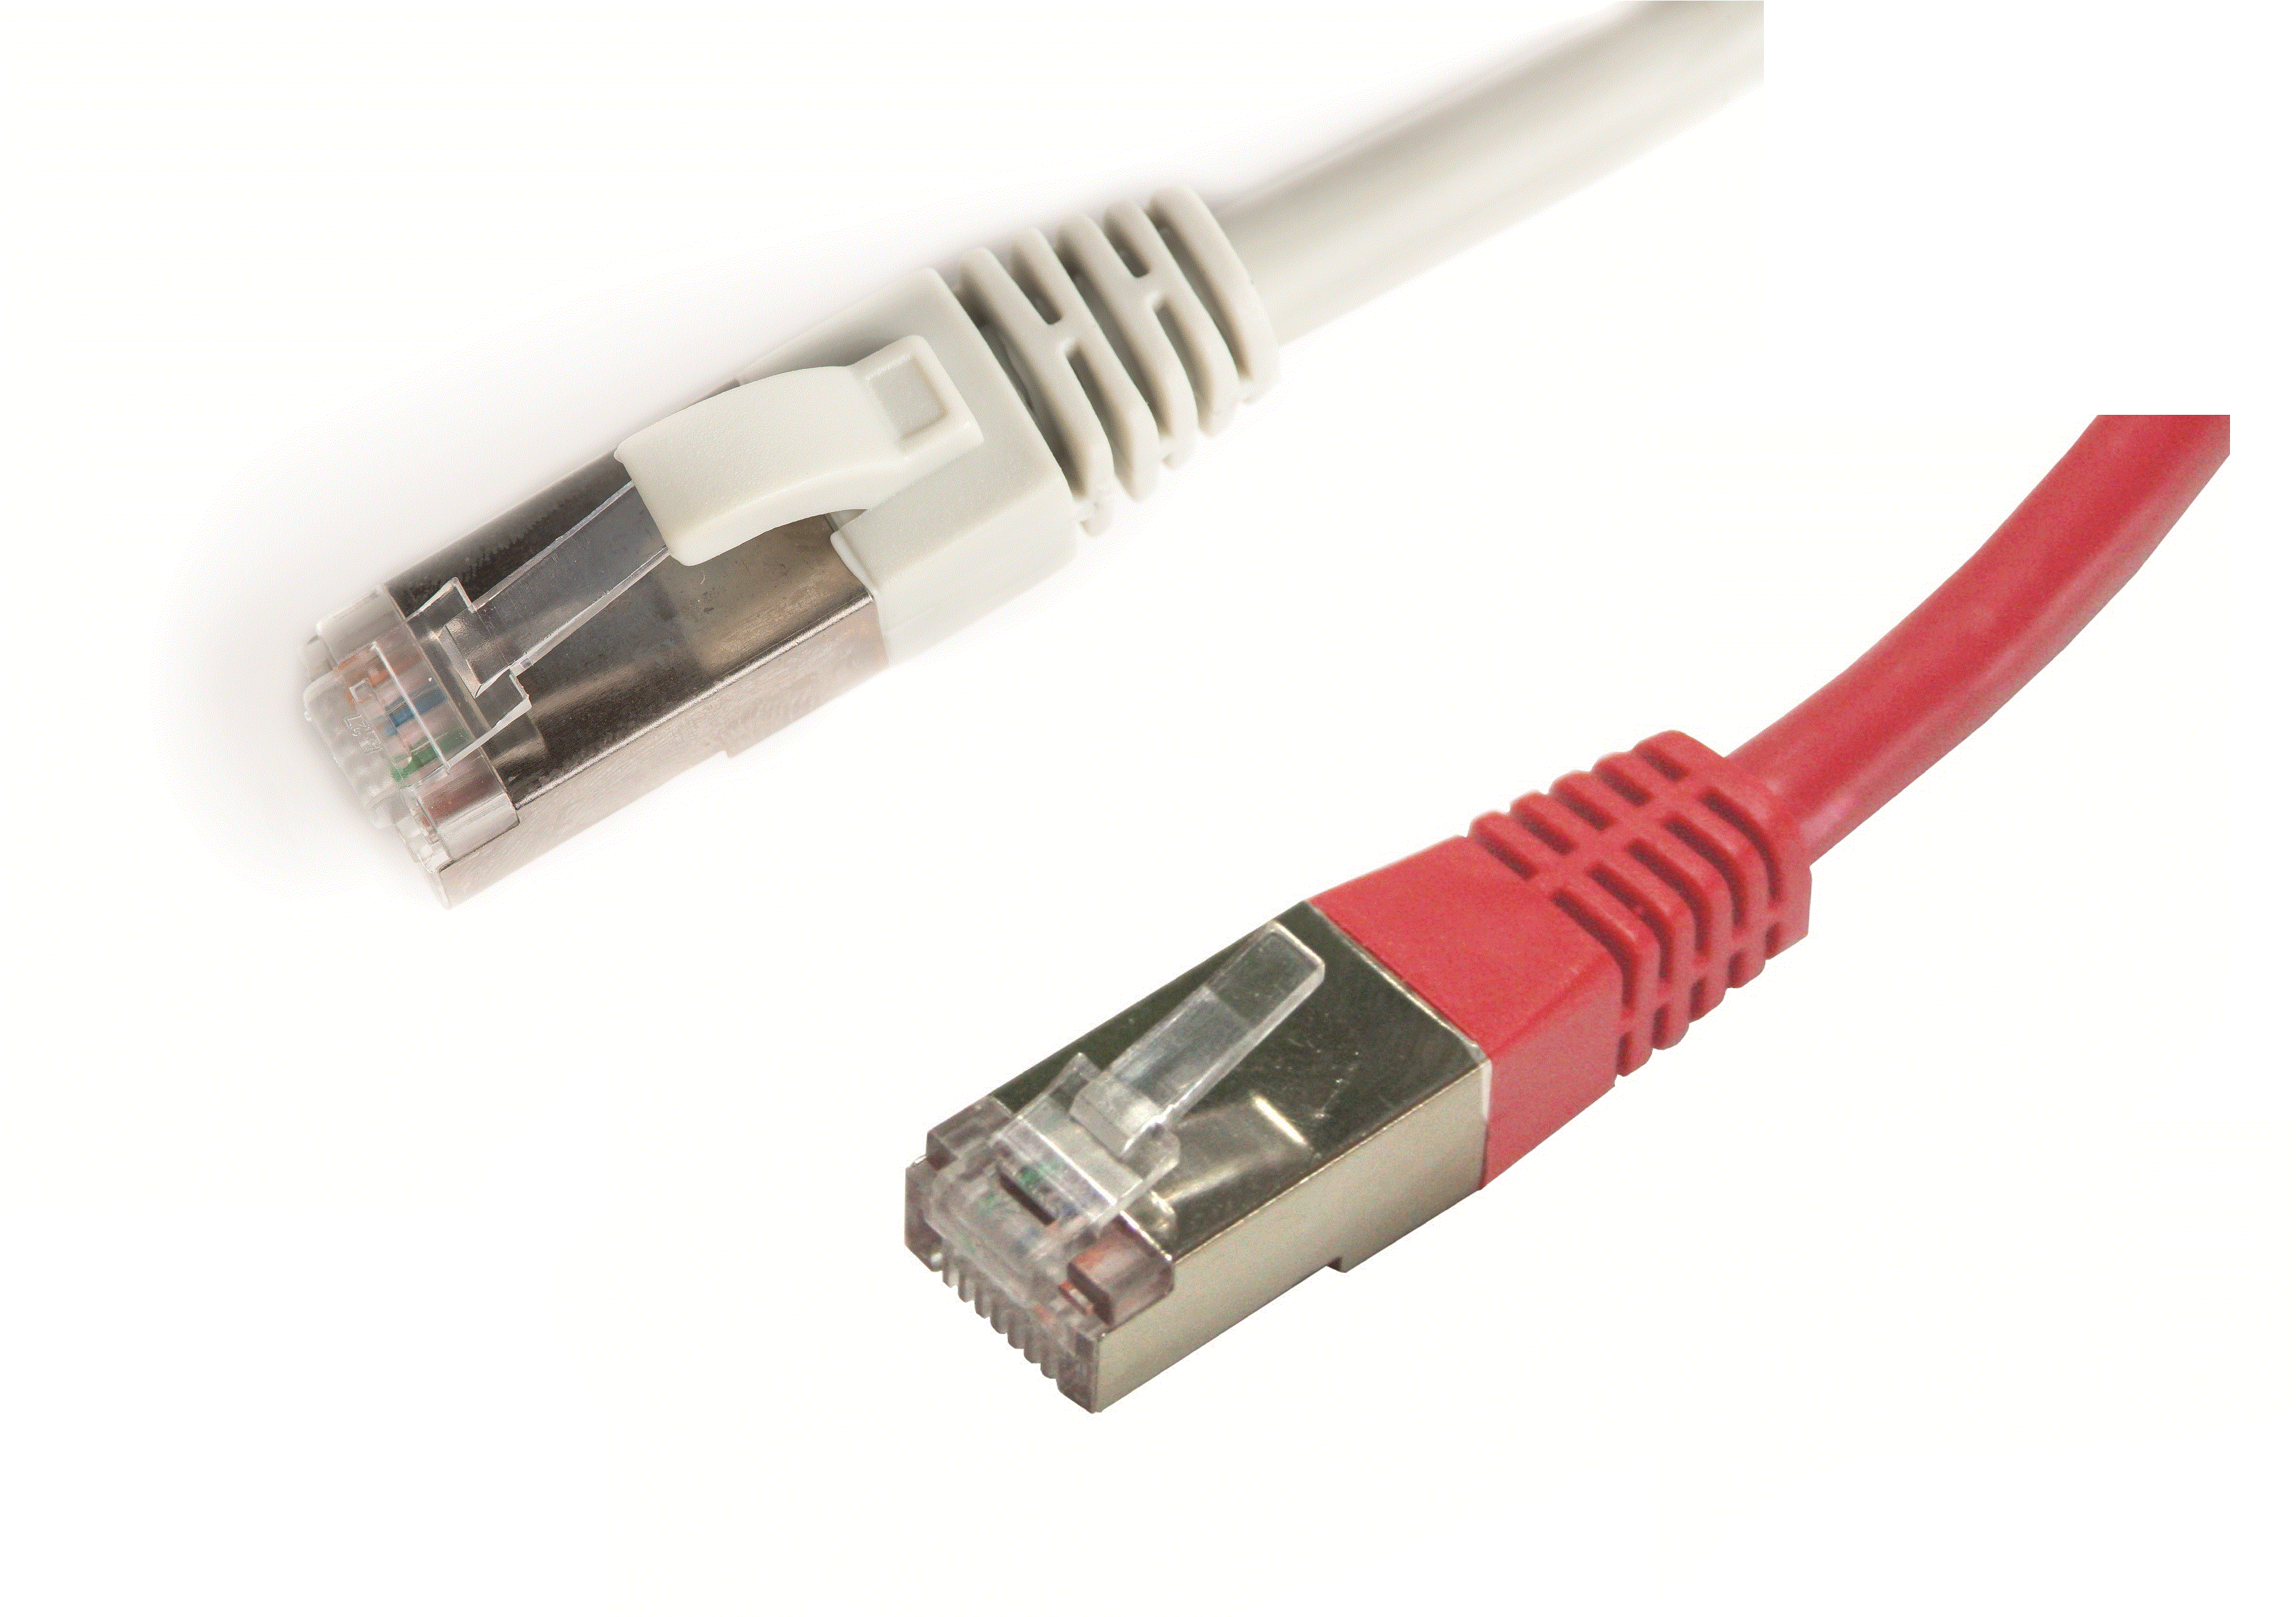 CATEGORY 6A SHIELDED PATCH CORD